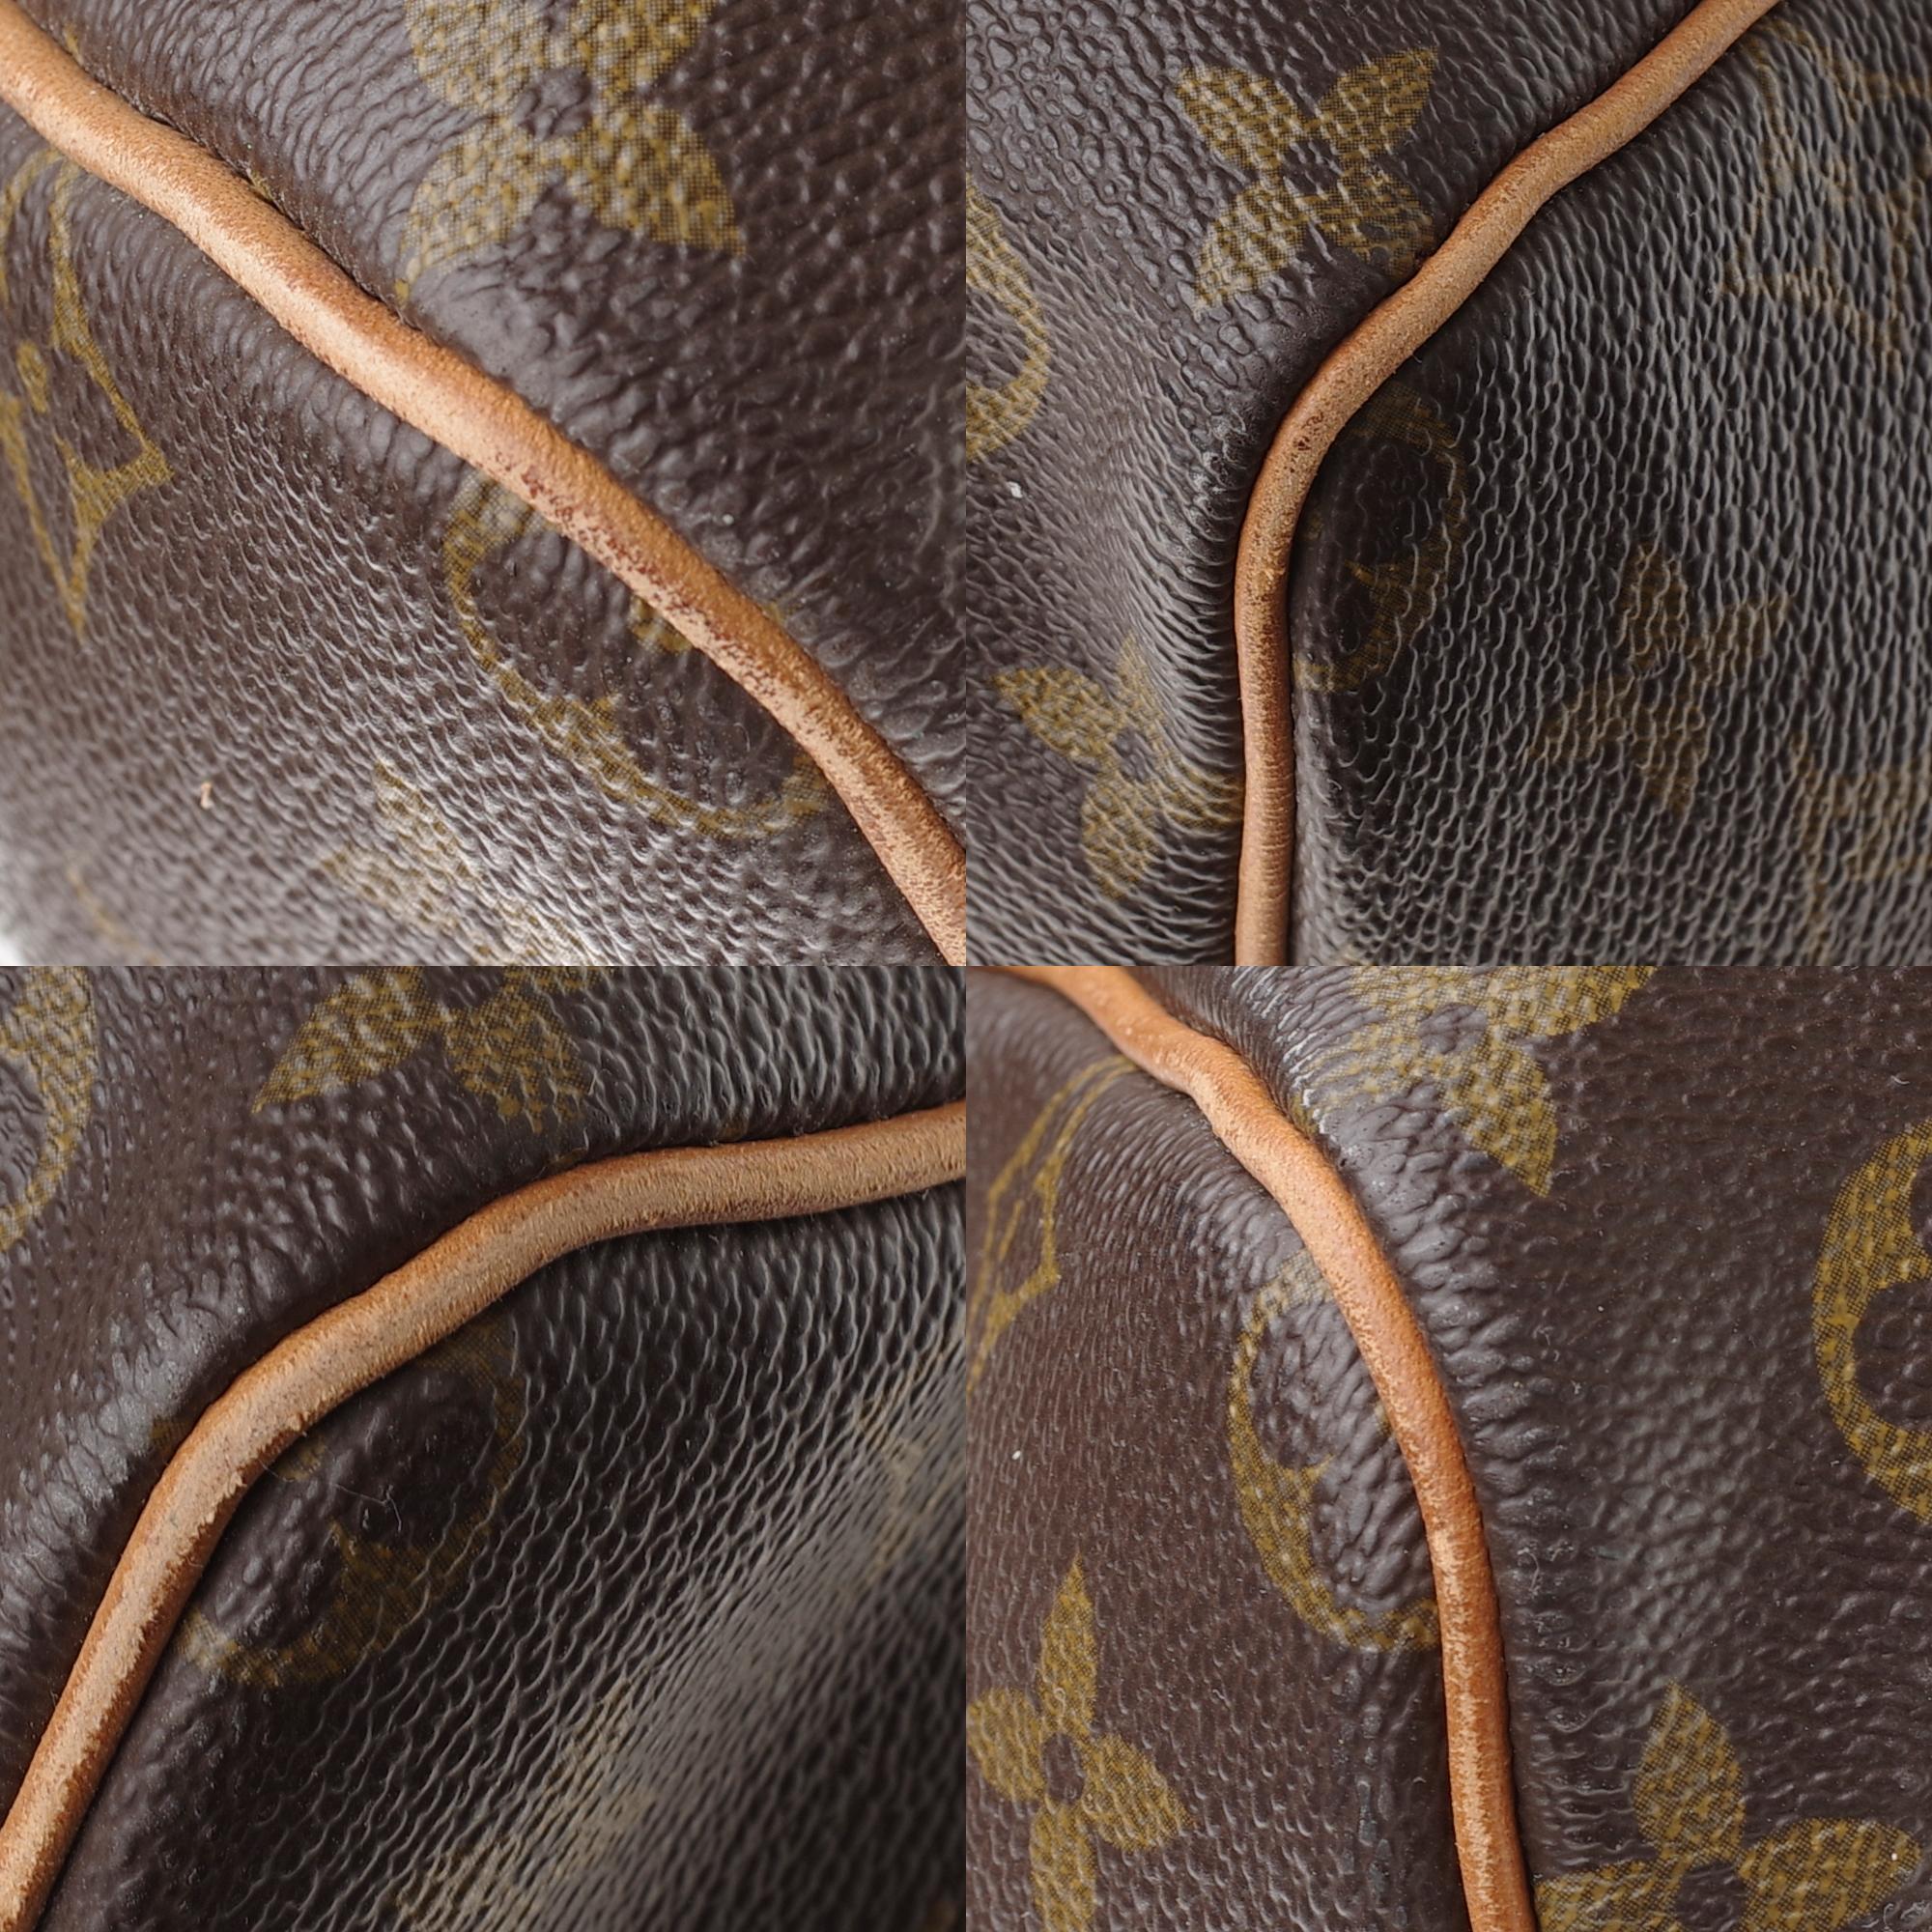 LV Keepall 60 Travel bag in monogram canvas customized 